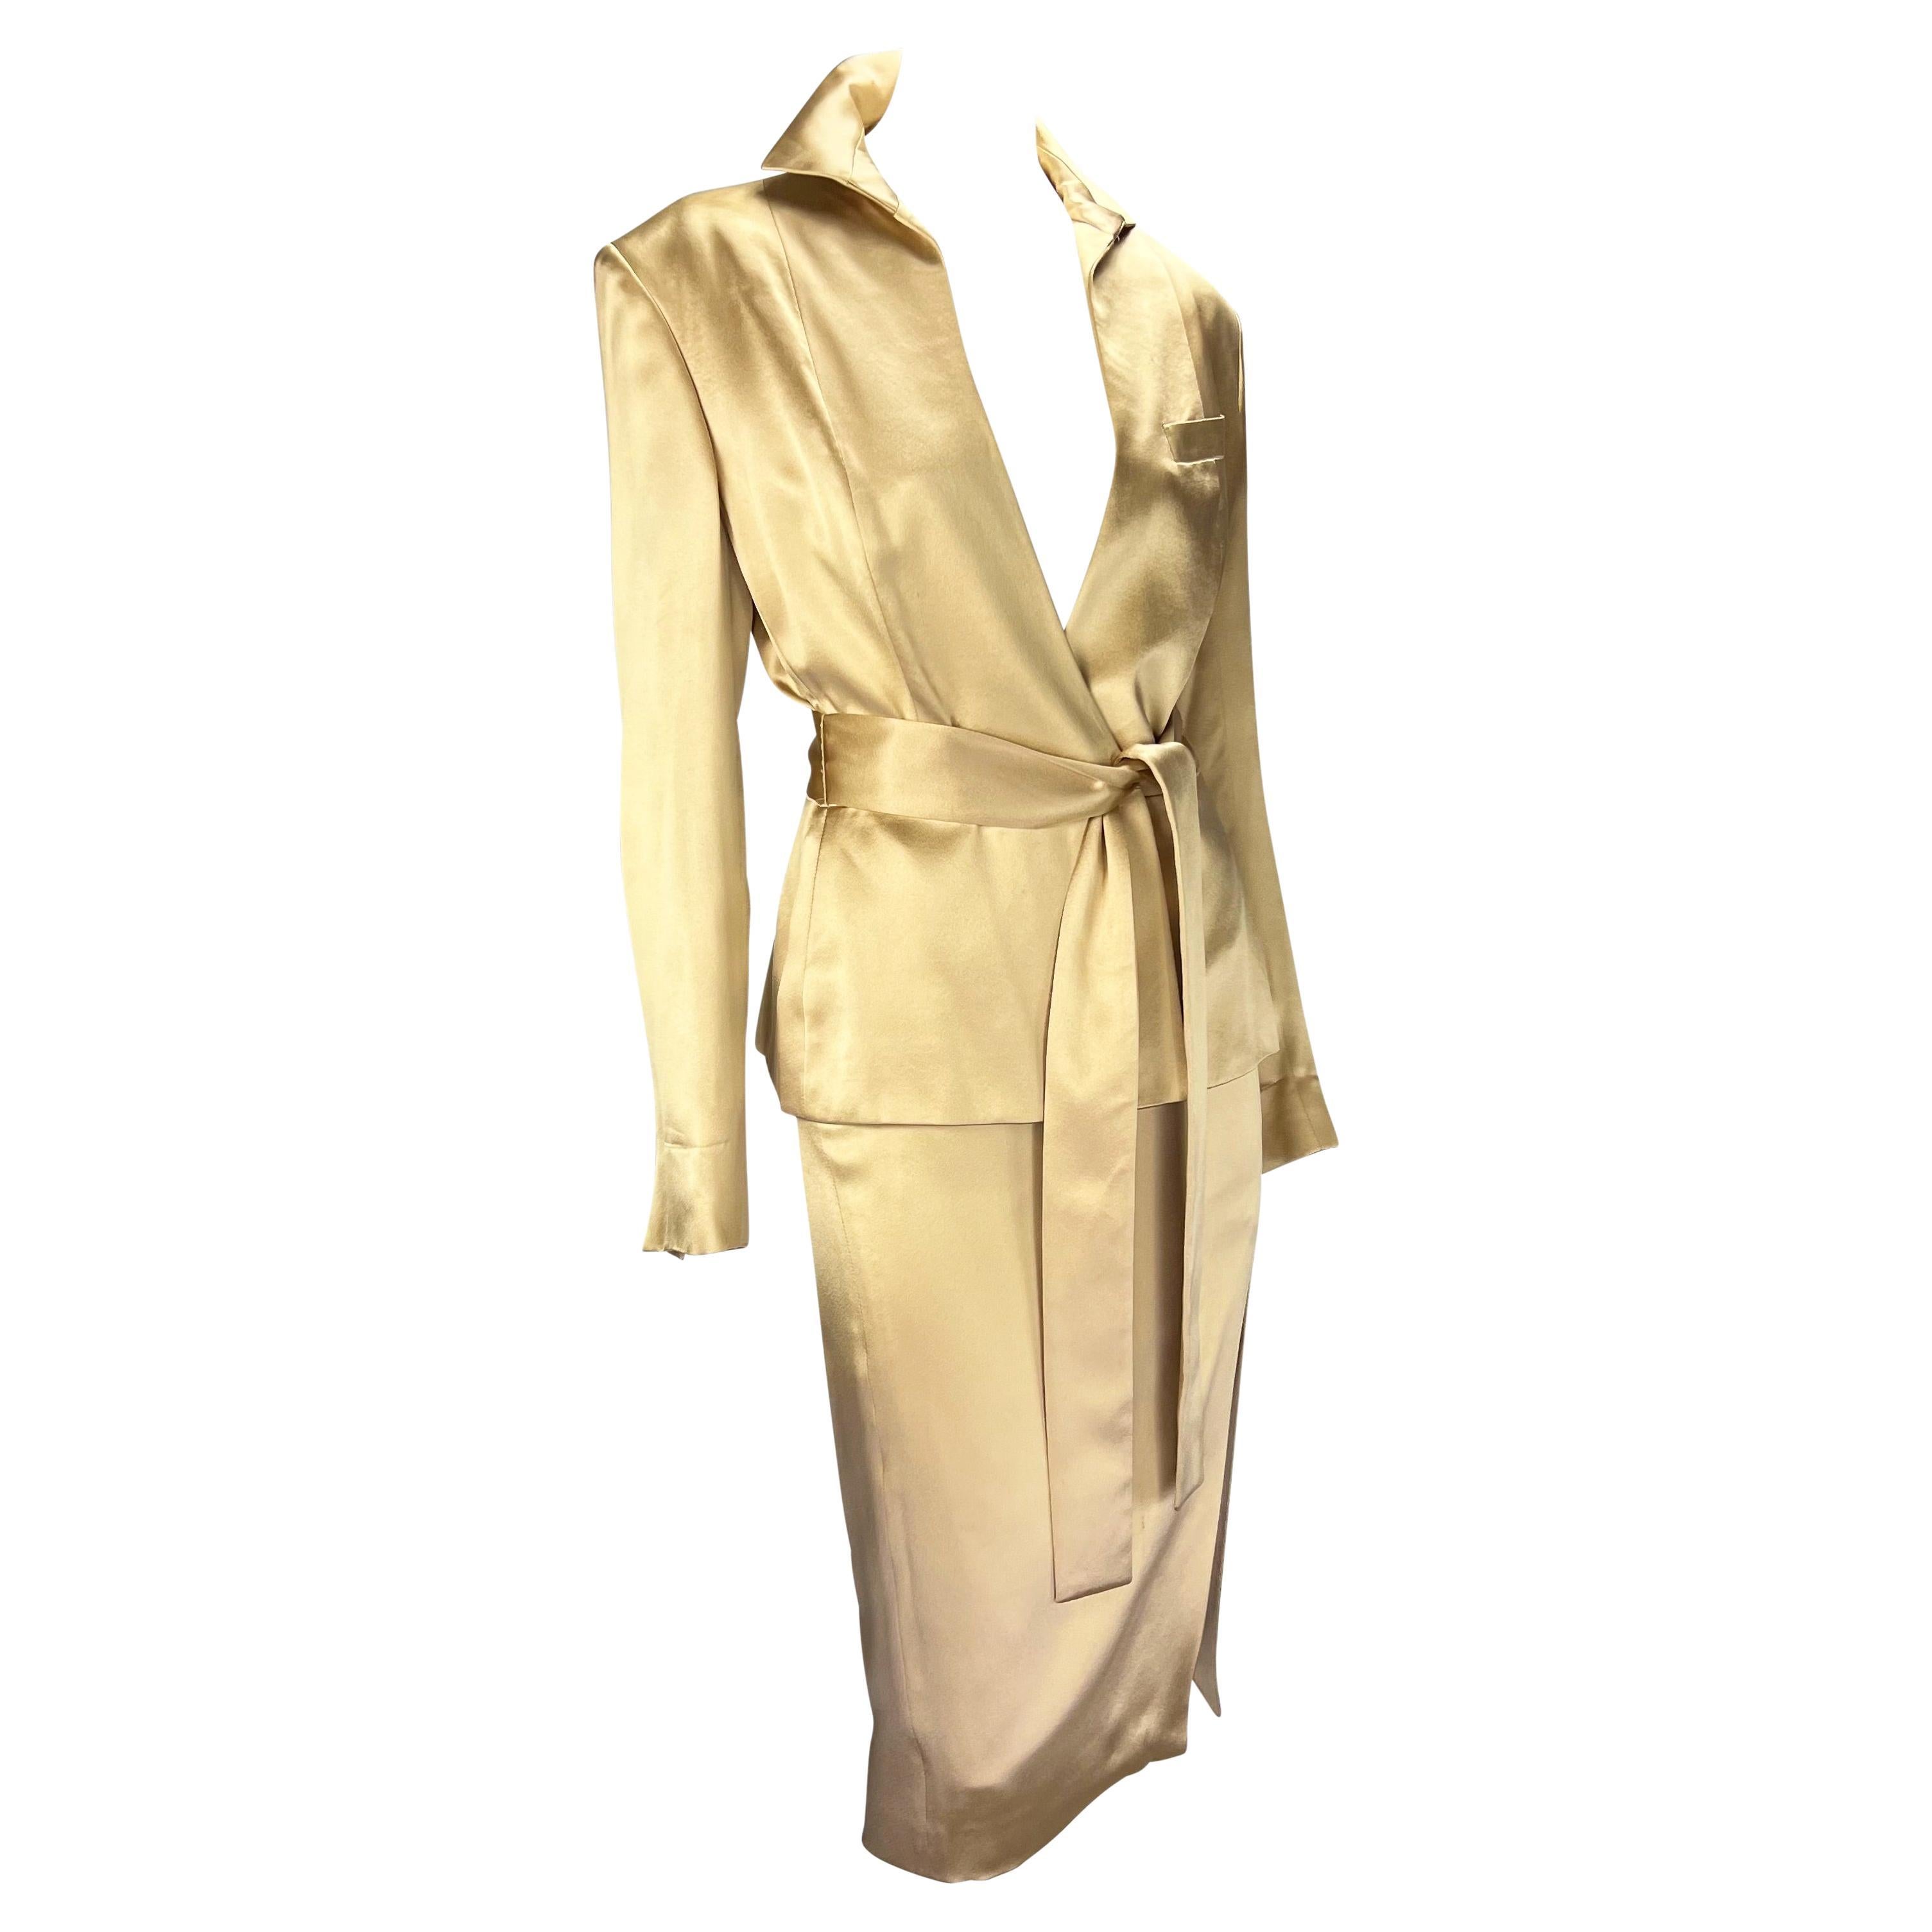 S/S 2001 Gucci by Tom Ford Champagne Silk Satin Sash Belt Sample Skirt Suit In Good Condition In West Hollywood, CA